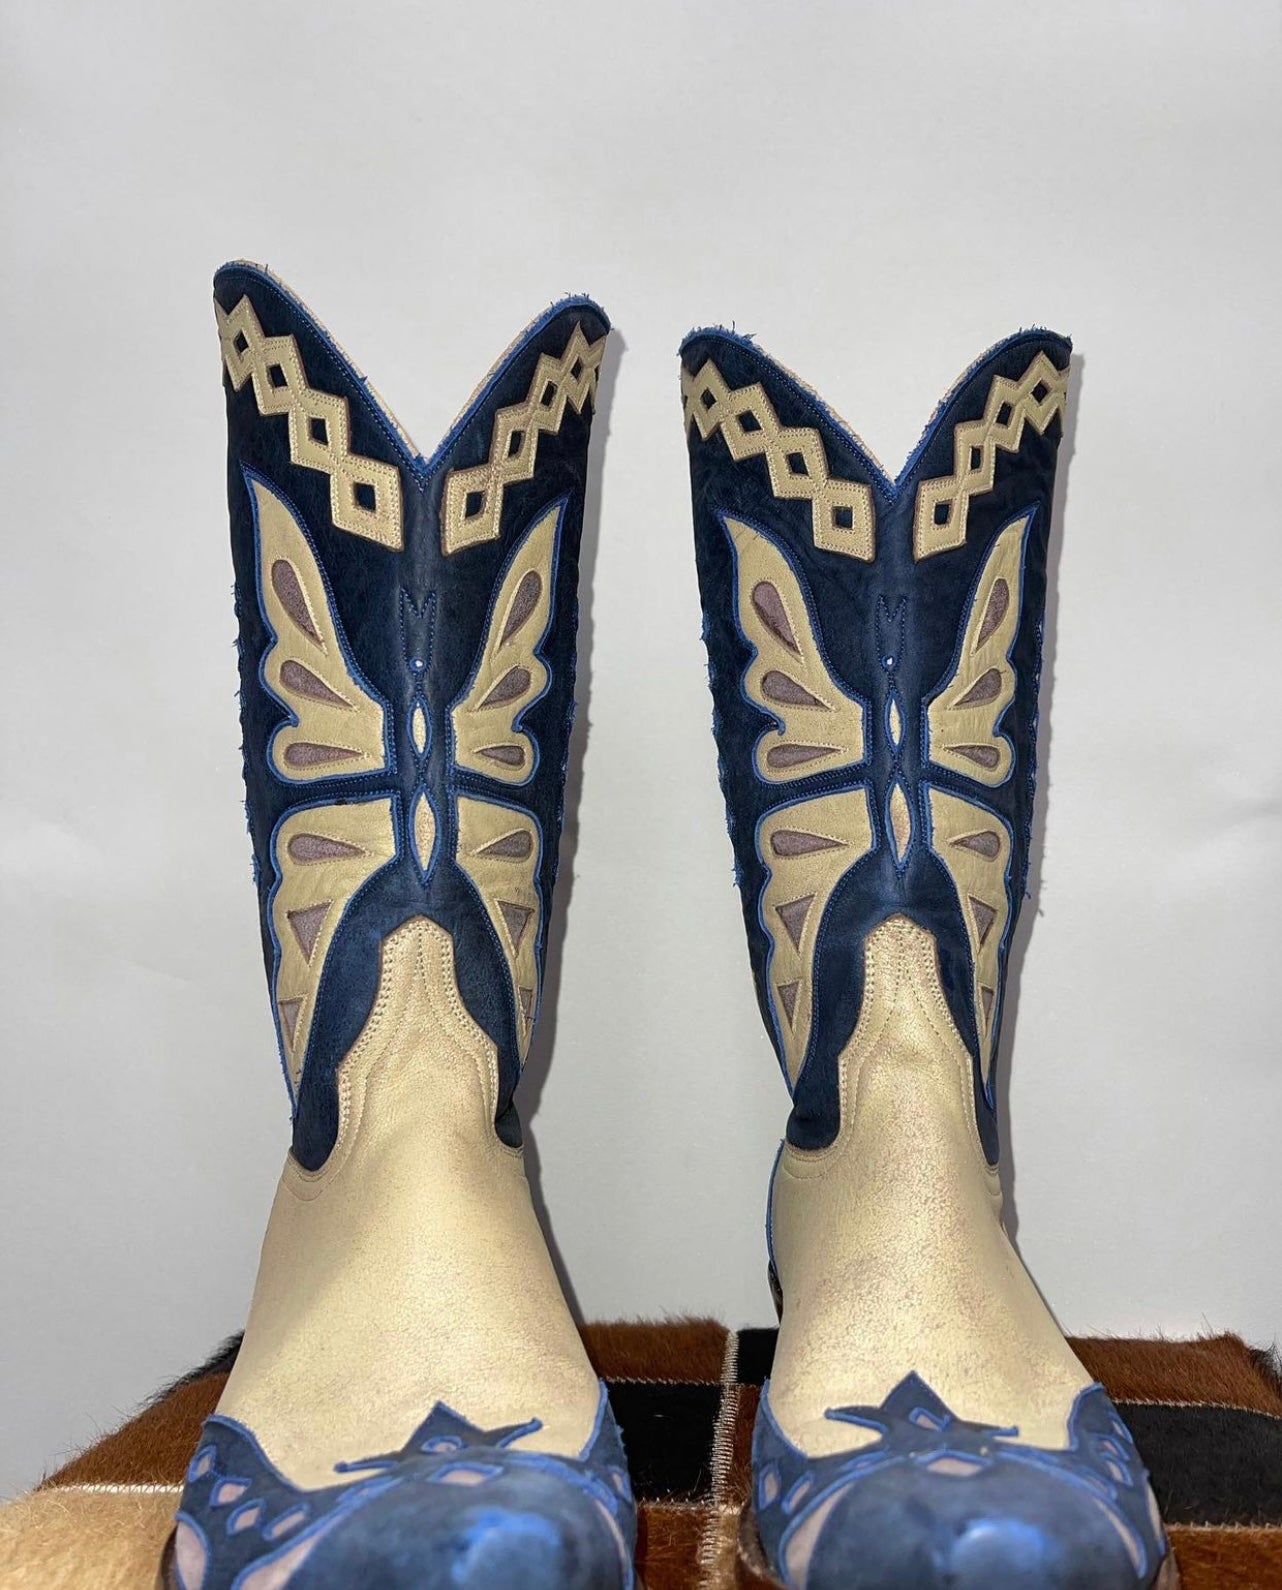 The Old Gringo Butterfly Blue boots